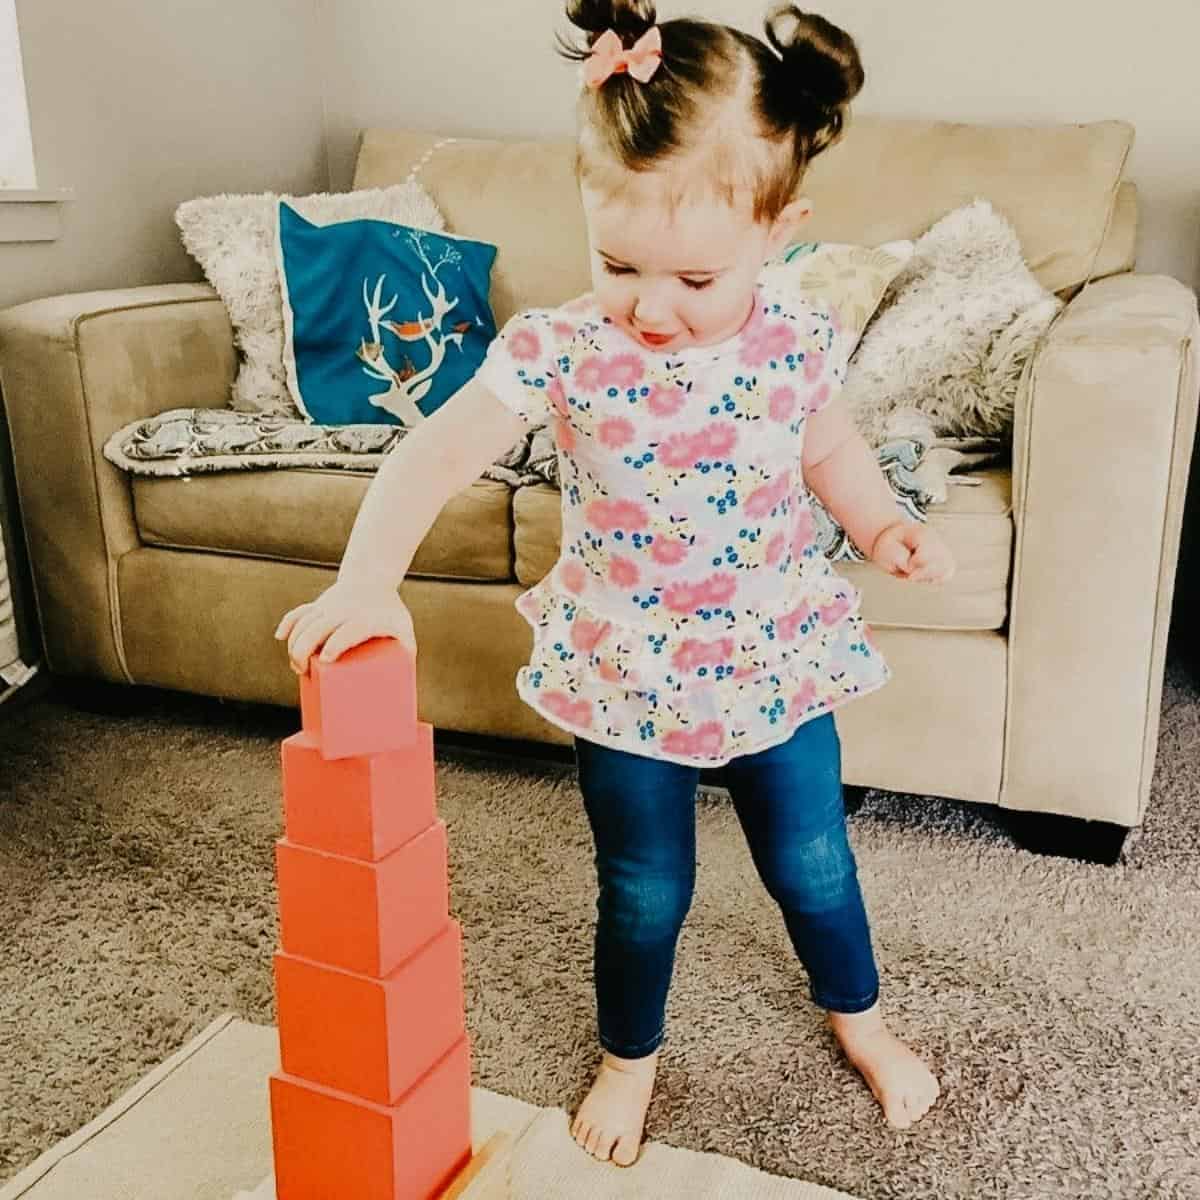 Child building the Montessori Pink Tower on mat in homeschool